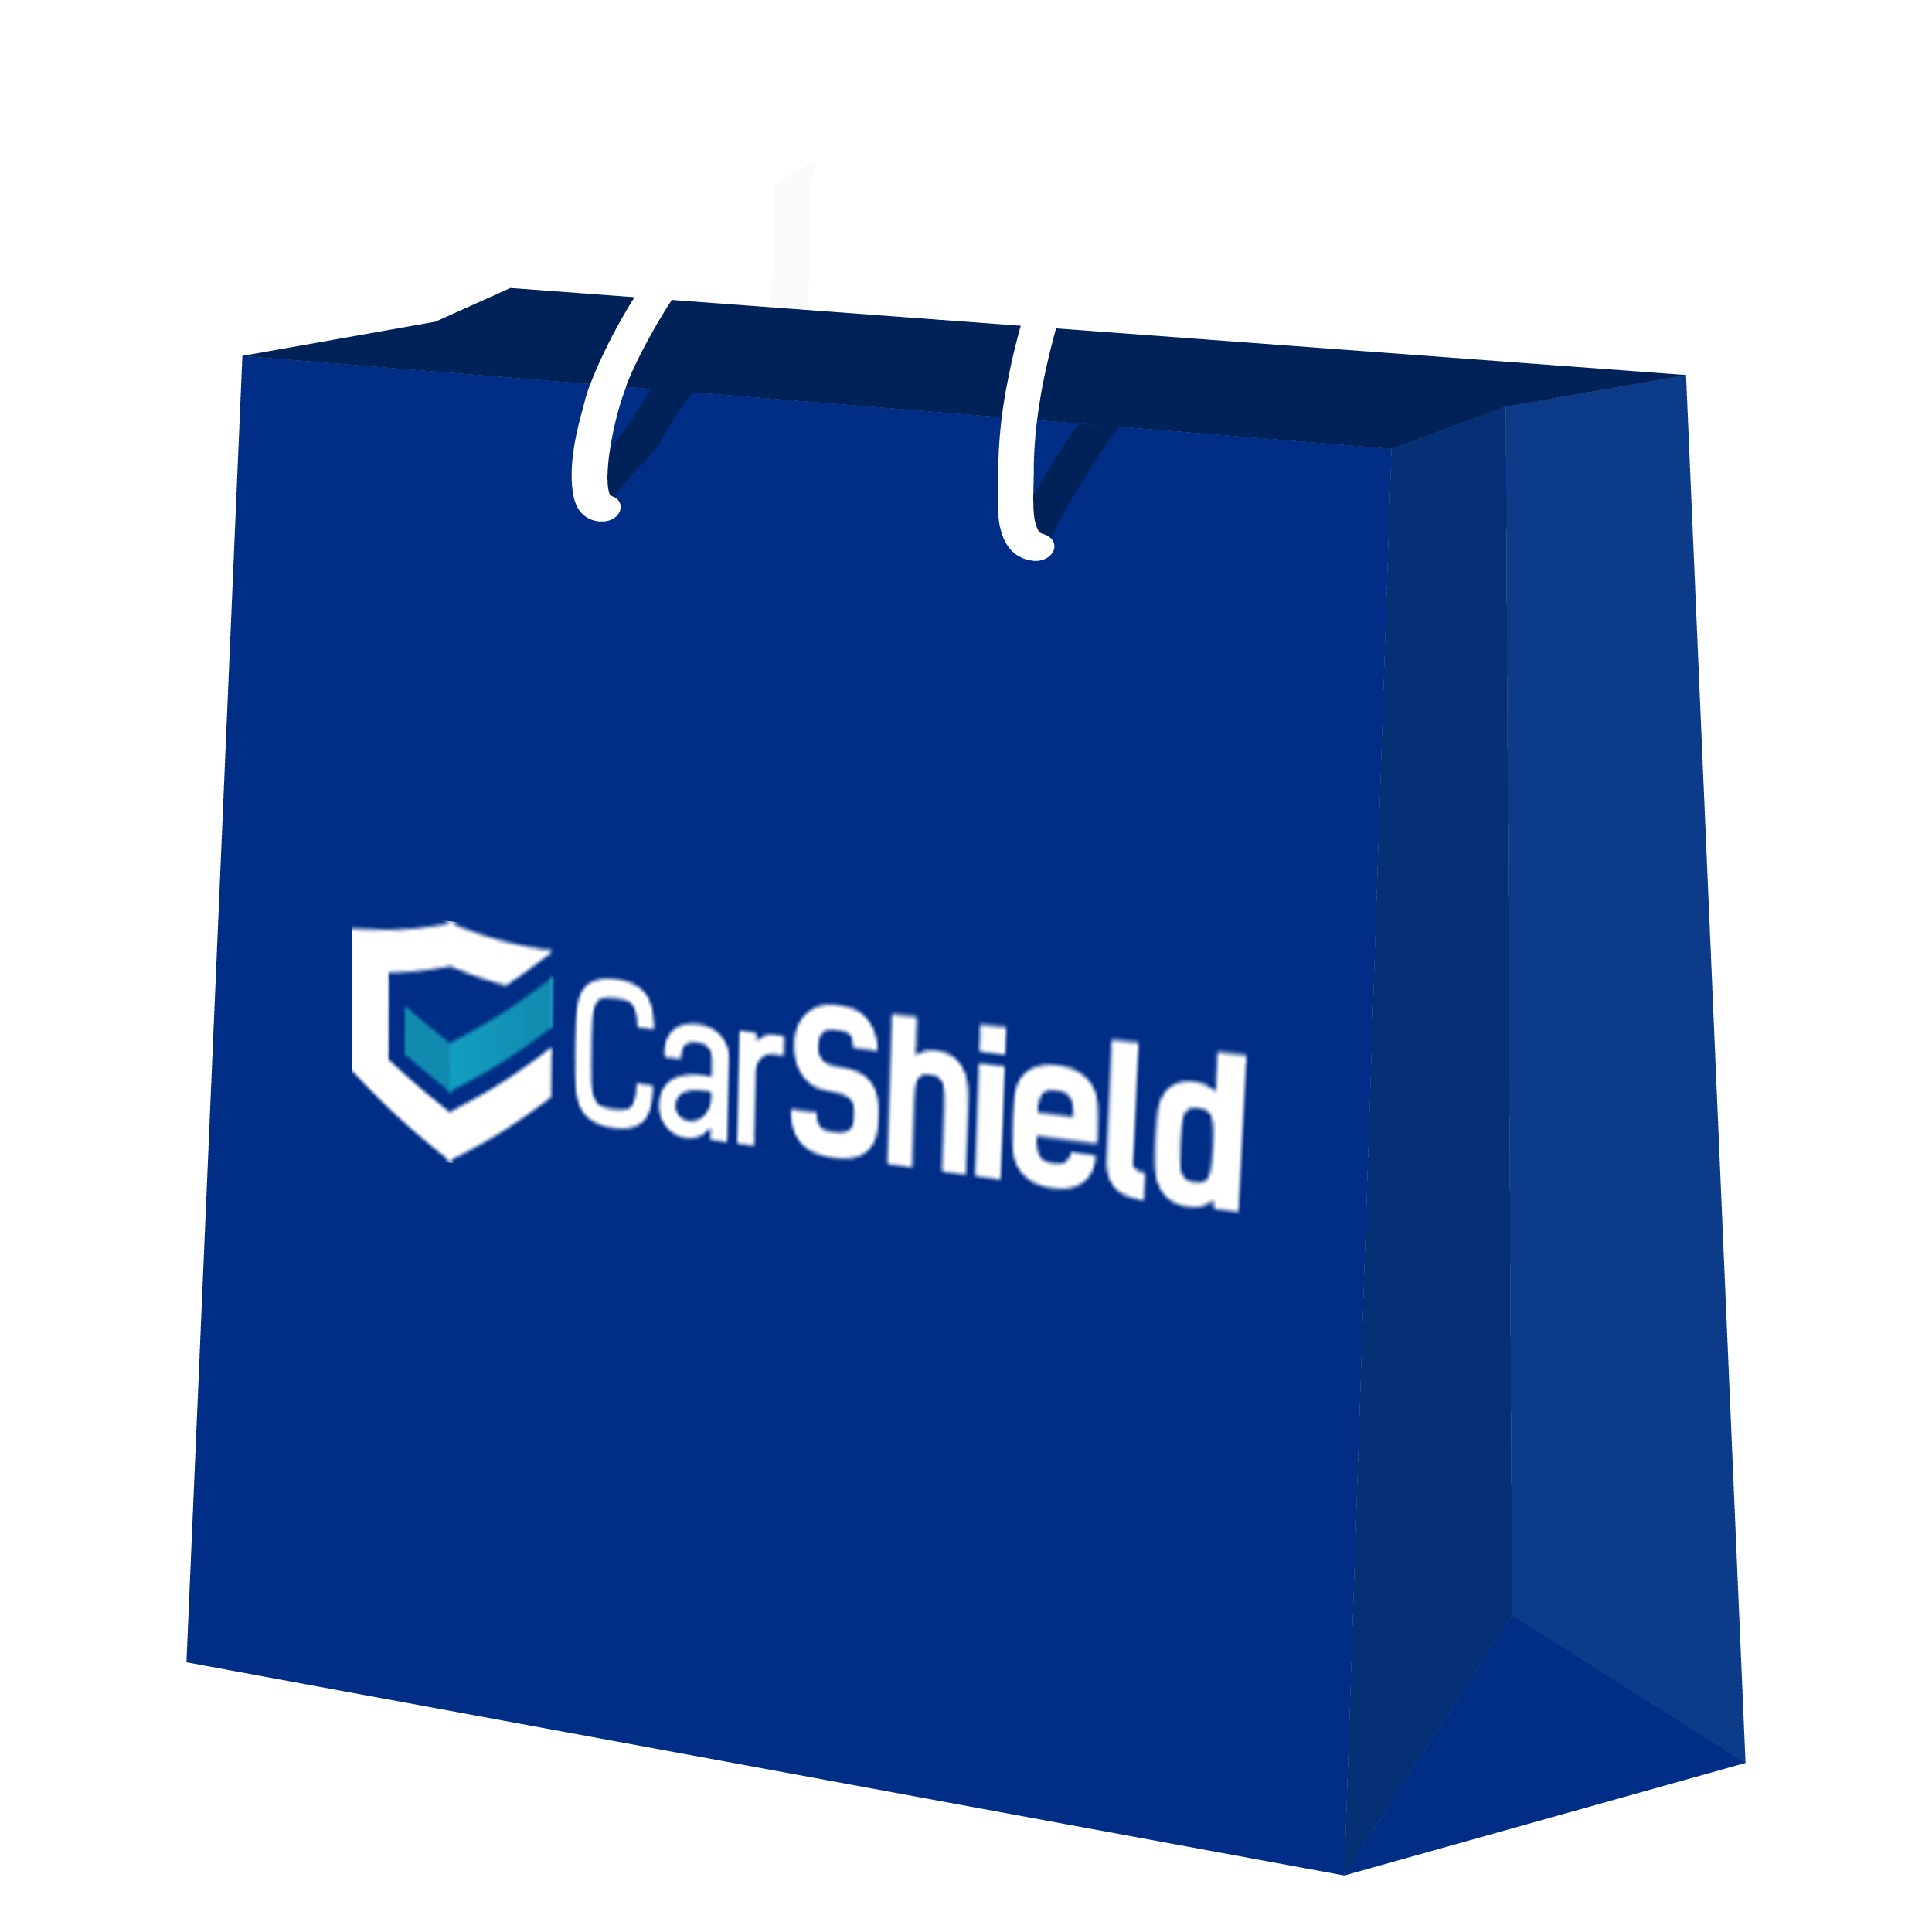 CarShield TV Sweepstake Prize